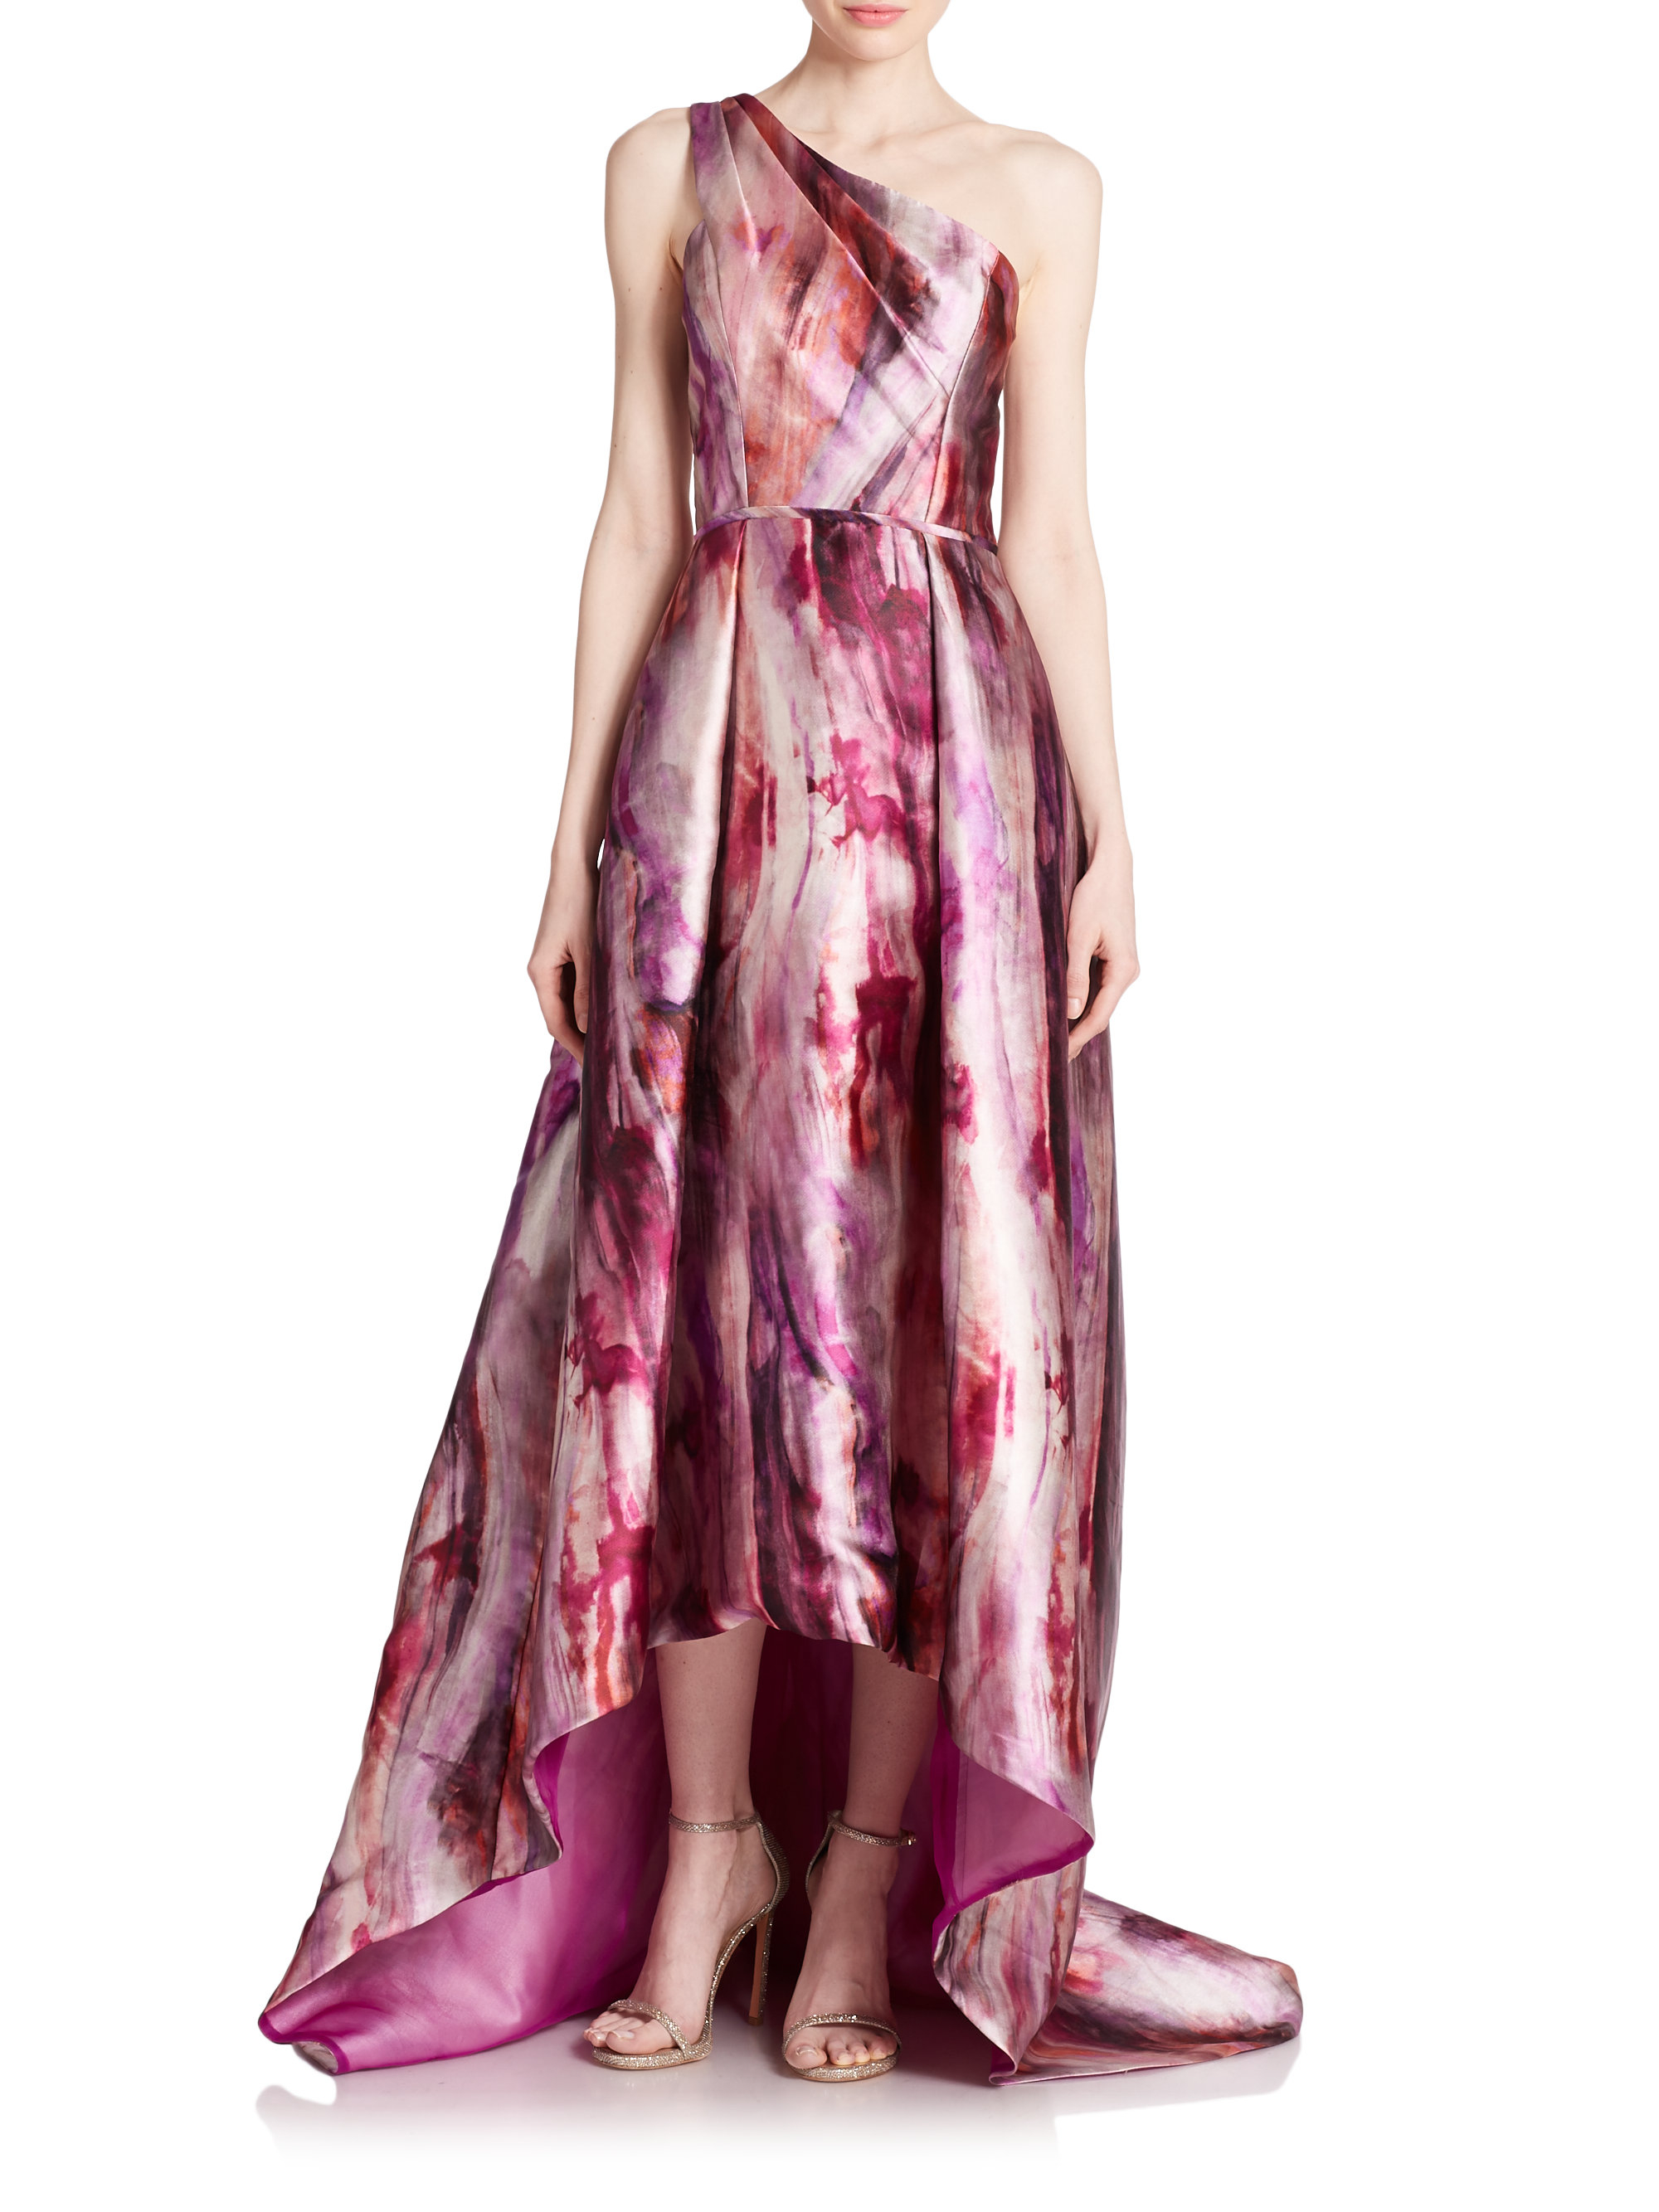 Lyst - Pamella Roland Orchid-Print Sateen Gown in Purple